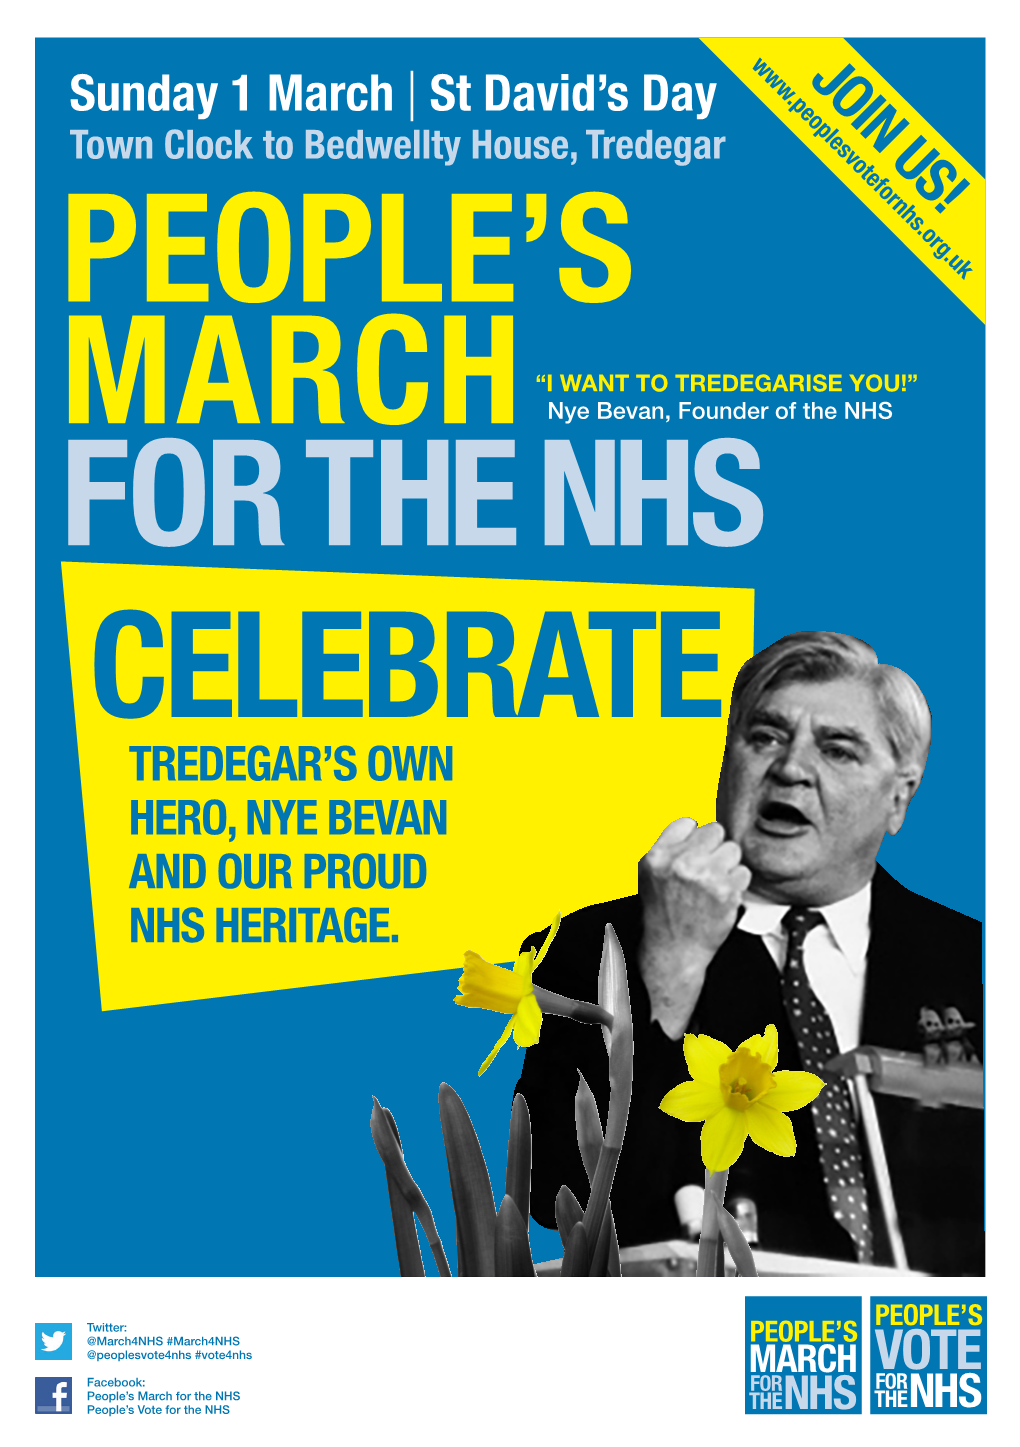 People's March for the Nhs Are Delighted to Be in the Wonderful